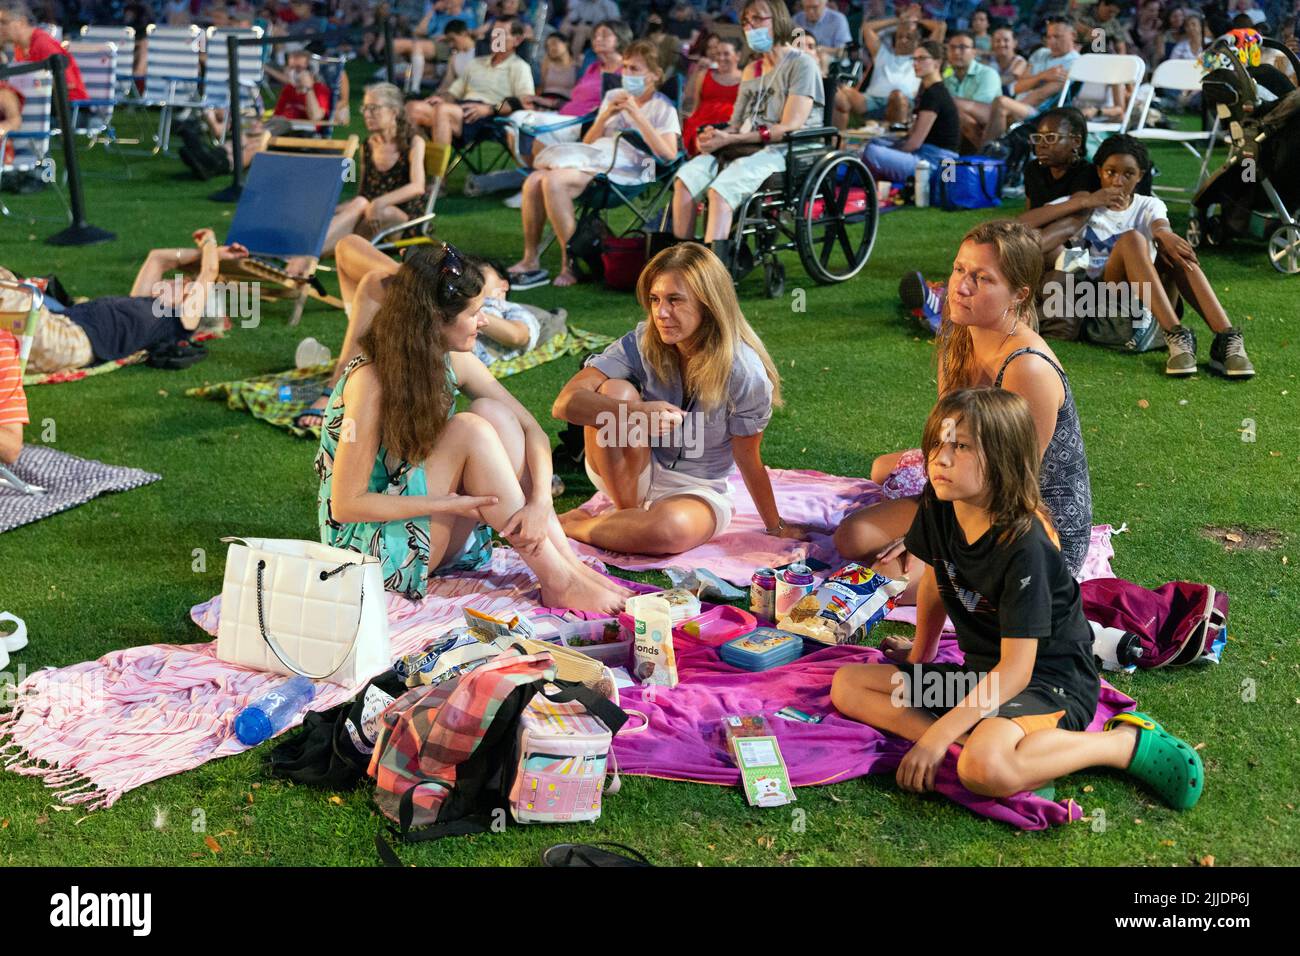 People outdoors on the Esplanade for a summer concert by the Boston Landmarks Orchestra Stock Photo